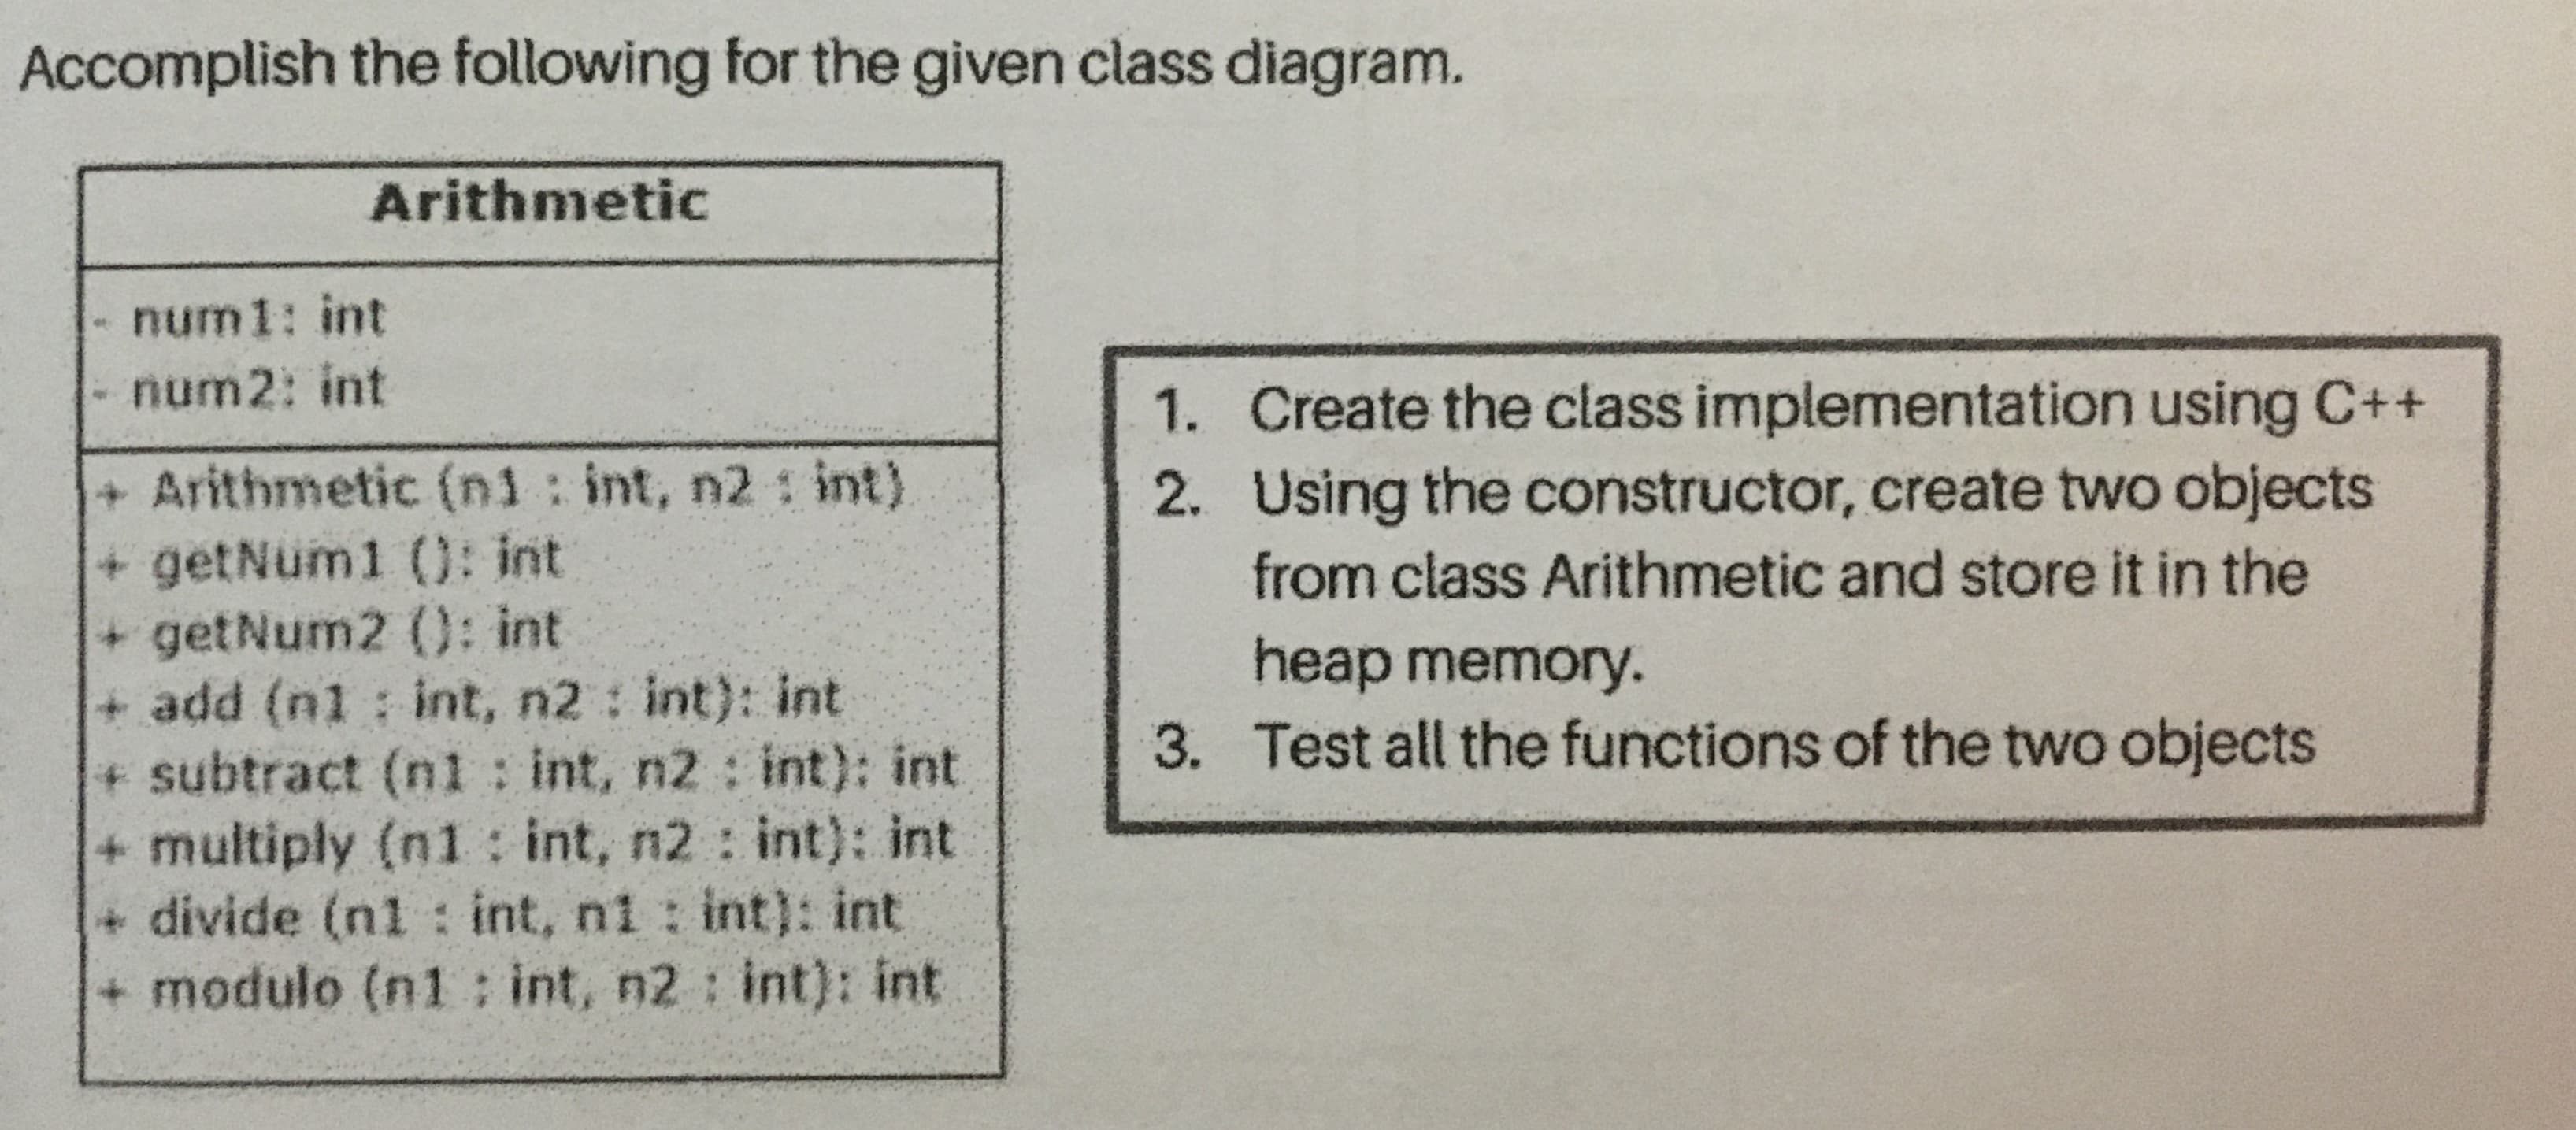 Accomplish the following for the given class diagram.
Arithmetic
num1: int
num2: int
1. Create the class implementation using C++
2. Using the constructor, create two objects
from class Arithmetic and store it in the
+ Arithmetic (n1: int, n2 : int)
+ getNum1 (): int
+ getNum2 (): int
+ add (n1 int, n2 int): int
+ subtract (nl : int, n2 : int): int
+ multiply (n1 : int, n2: int): int
+ divide (n1 : int, ni : int): int
+ modulo (n1 int, n2 : int): int
heap memory.
3. Test all the functions of the two objects
